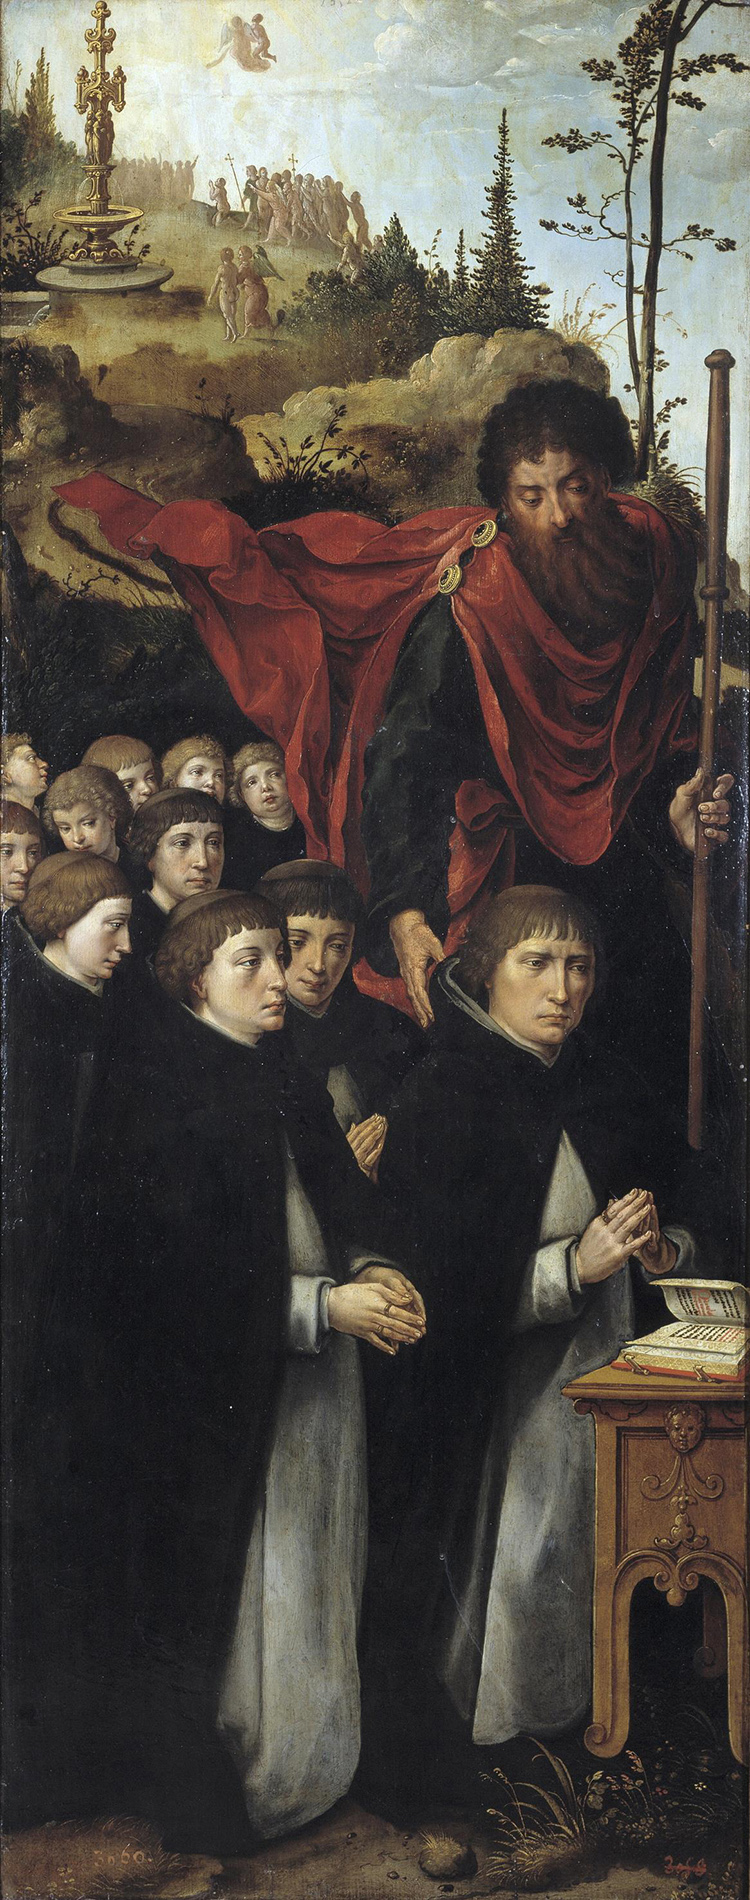 Saint James the Greater with Donors in Prayer, Pieter Coecke Van Aelst, 1532.